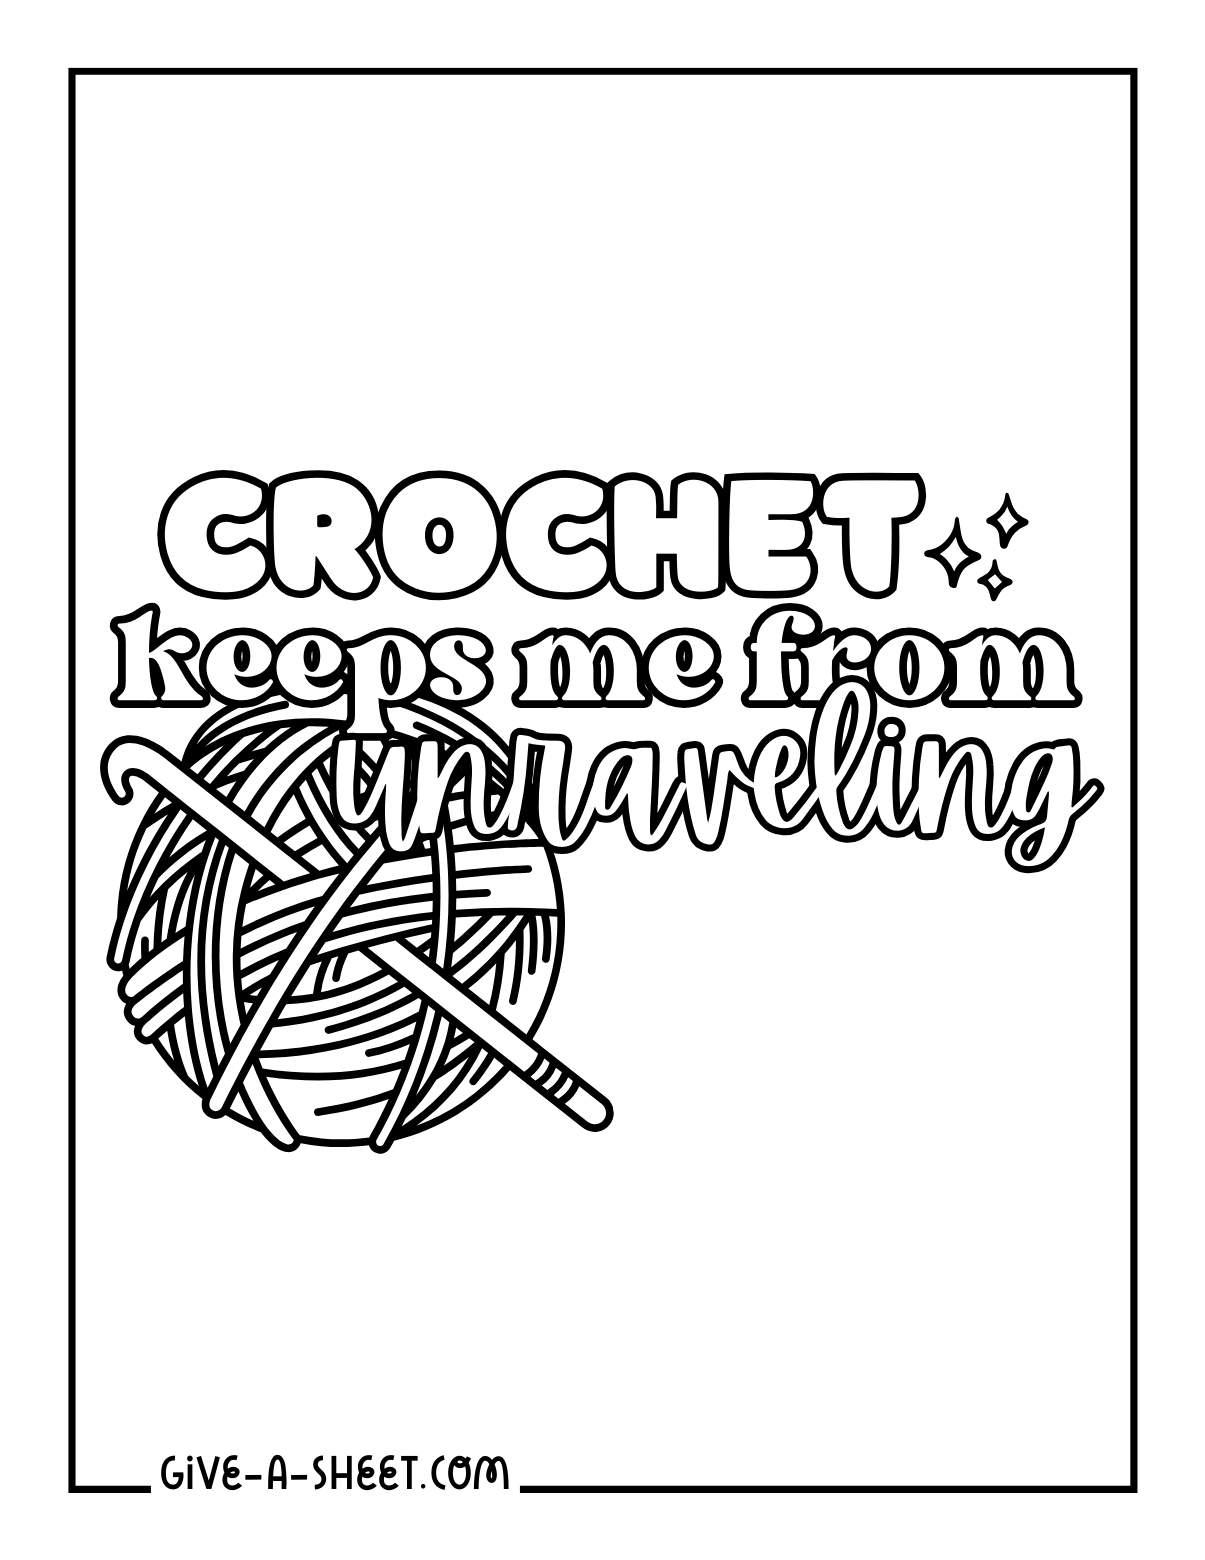 Crochet hooks and yarn skein coloring page.